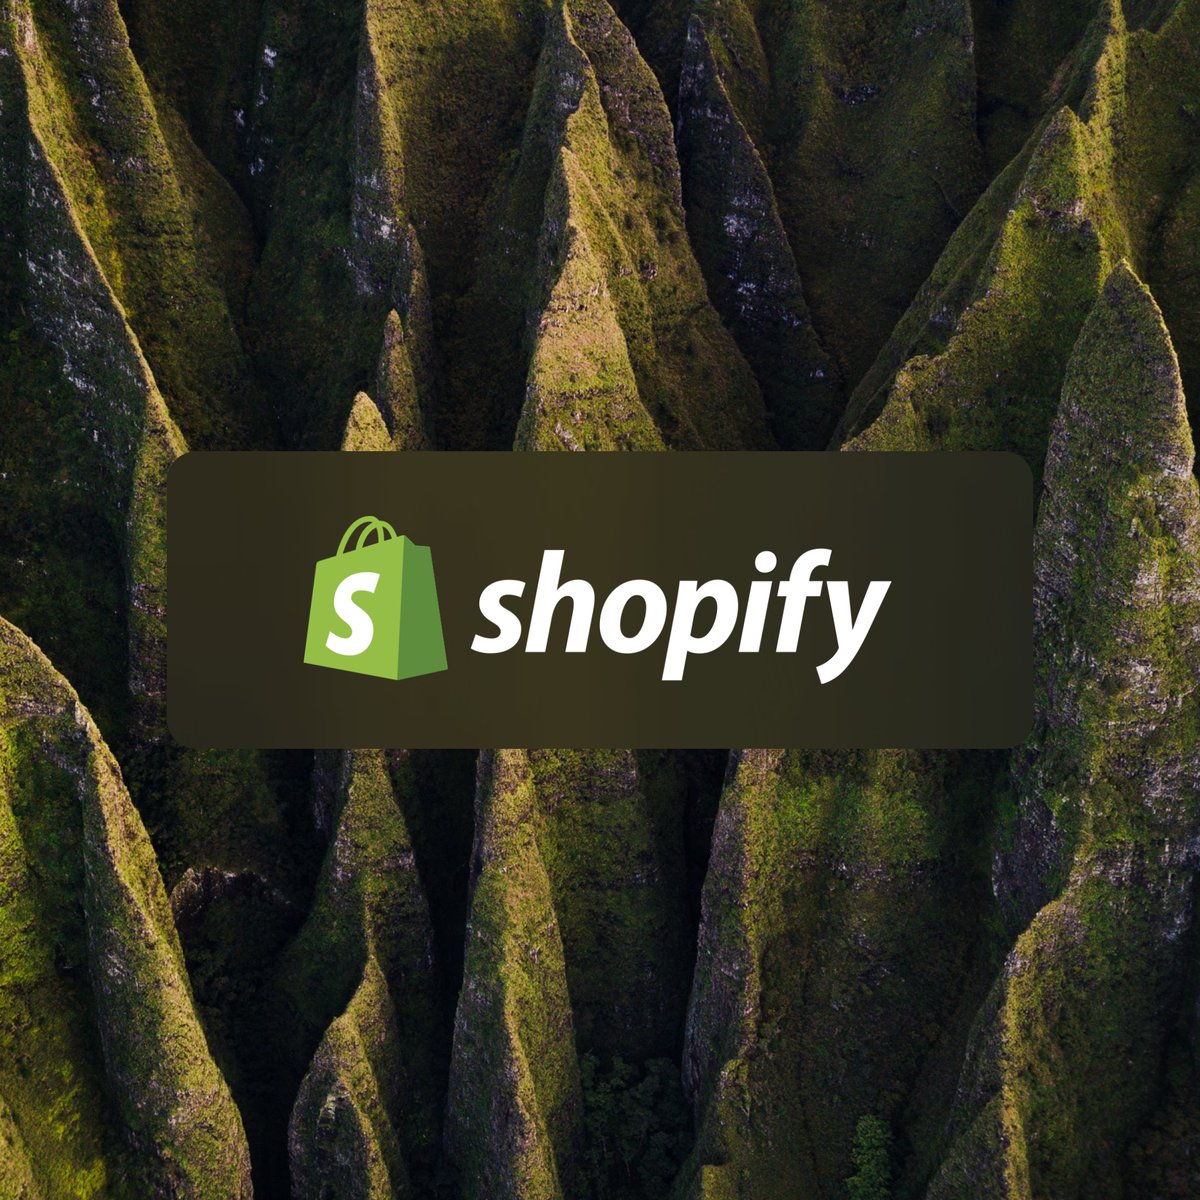 Congratulations to the @Shopify team for such incredible progress in your ambition to scale innovations in carbon removal! See how Shopify partnered with Pachama to build nature into these long-term ambitions pachama.com/blog/customer-…